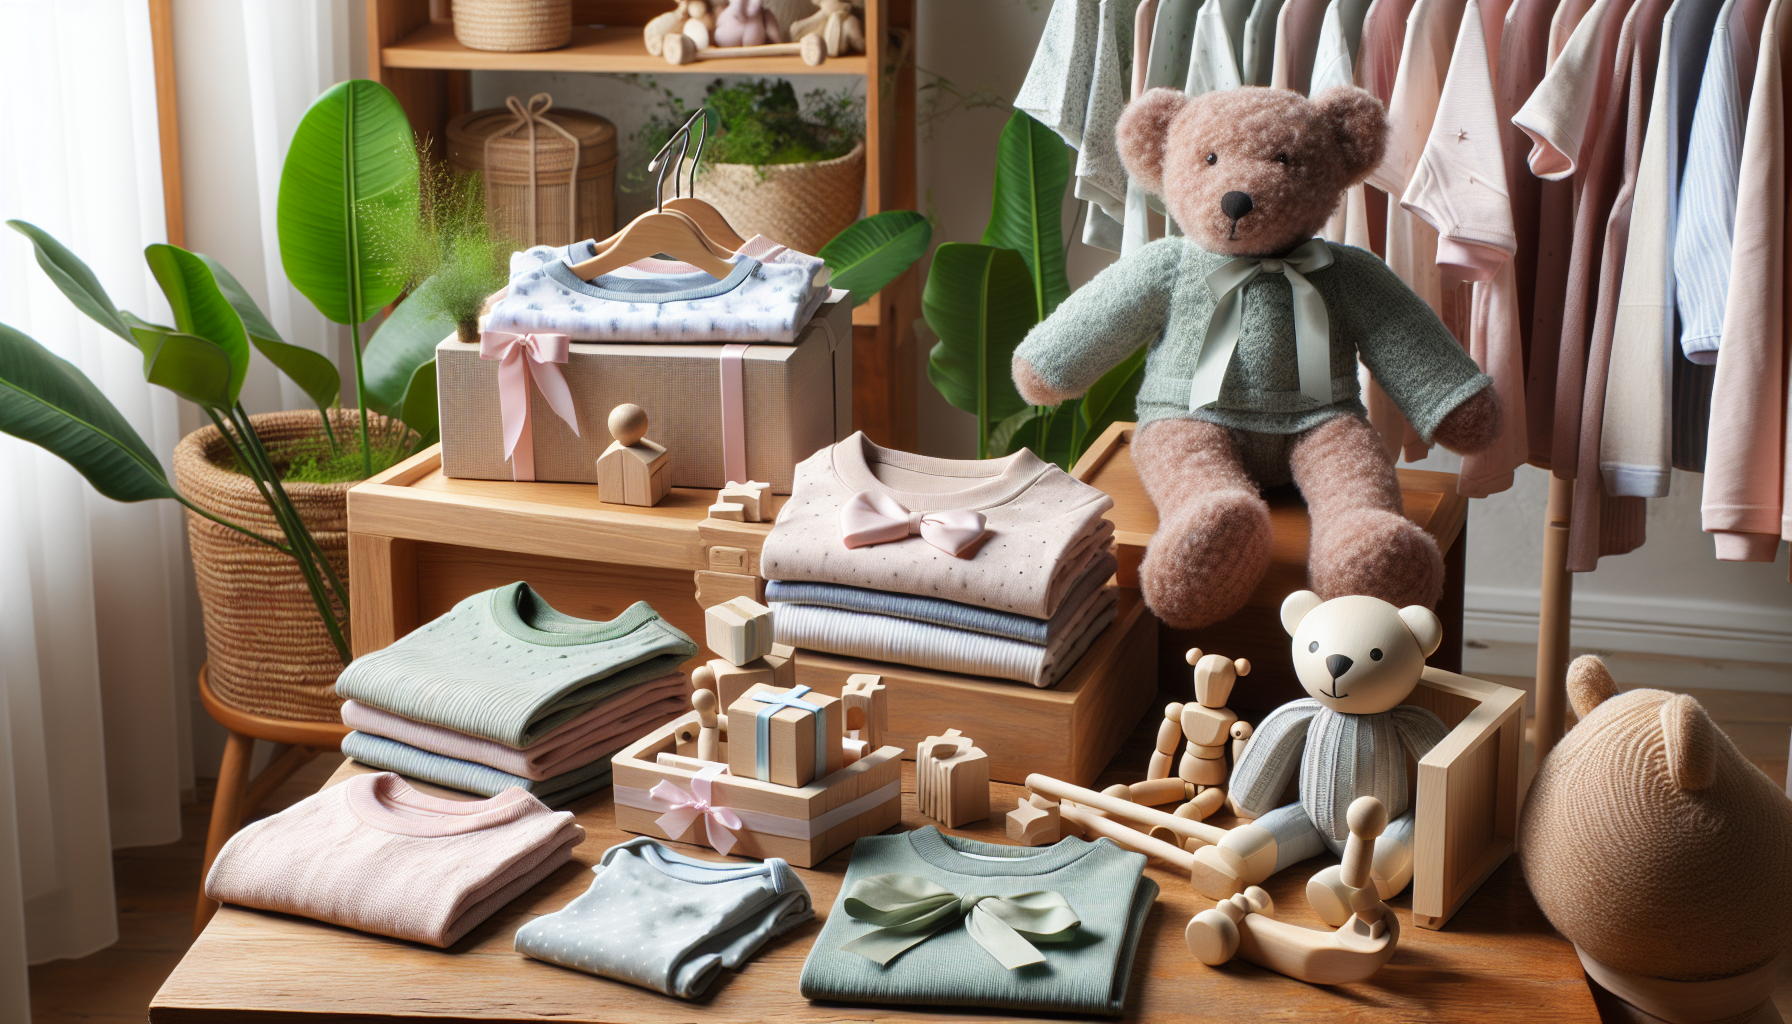 Organic baby clothing sets and sustainable toys